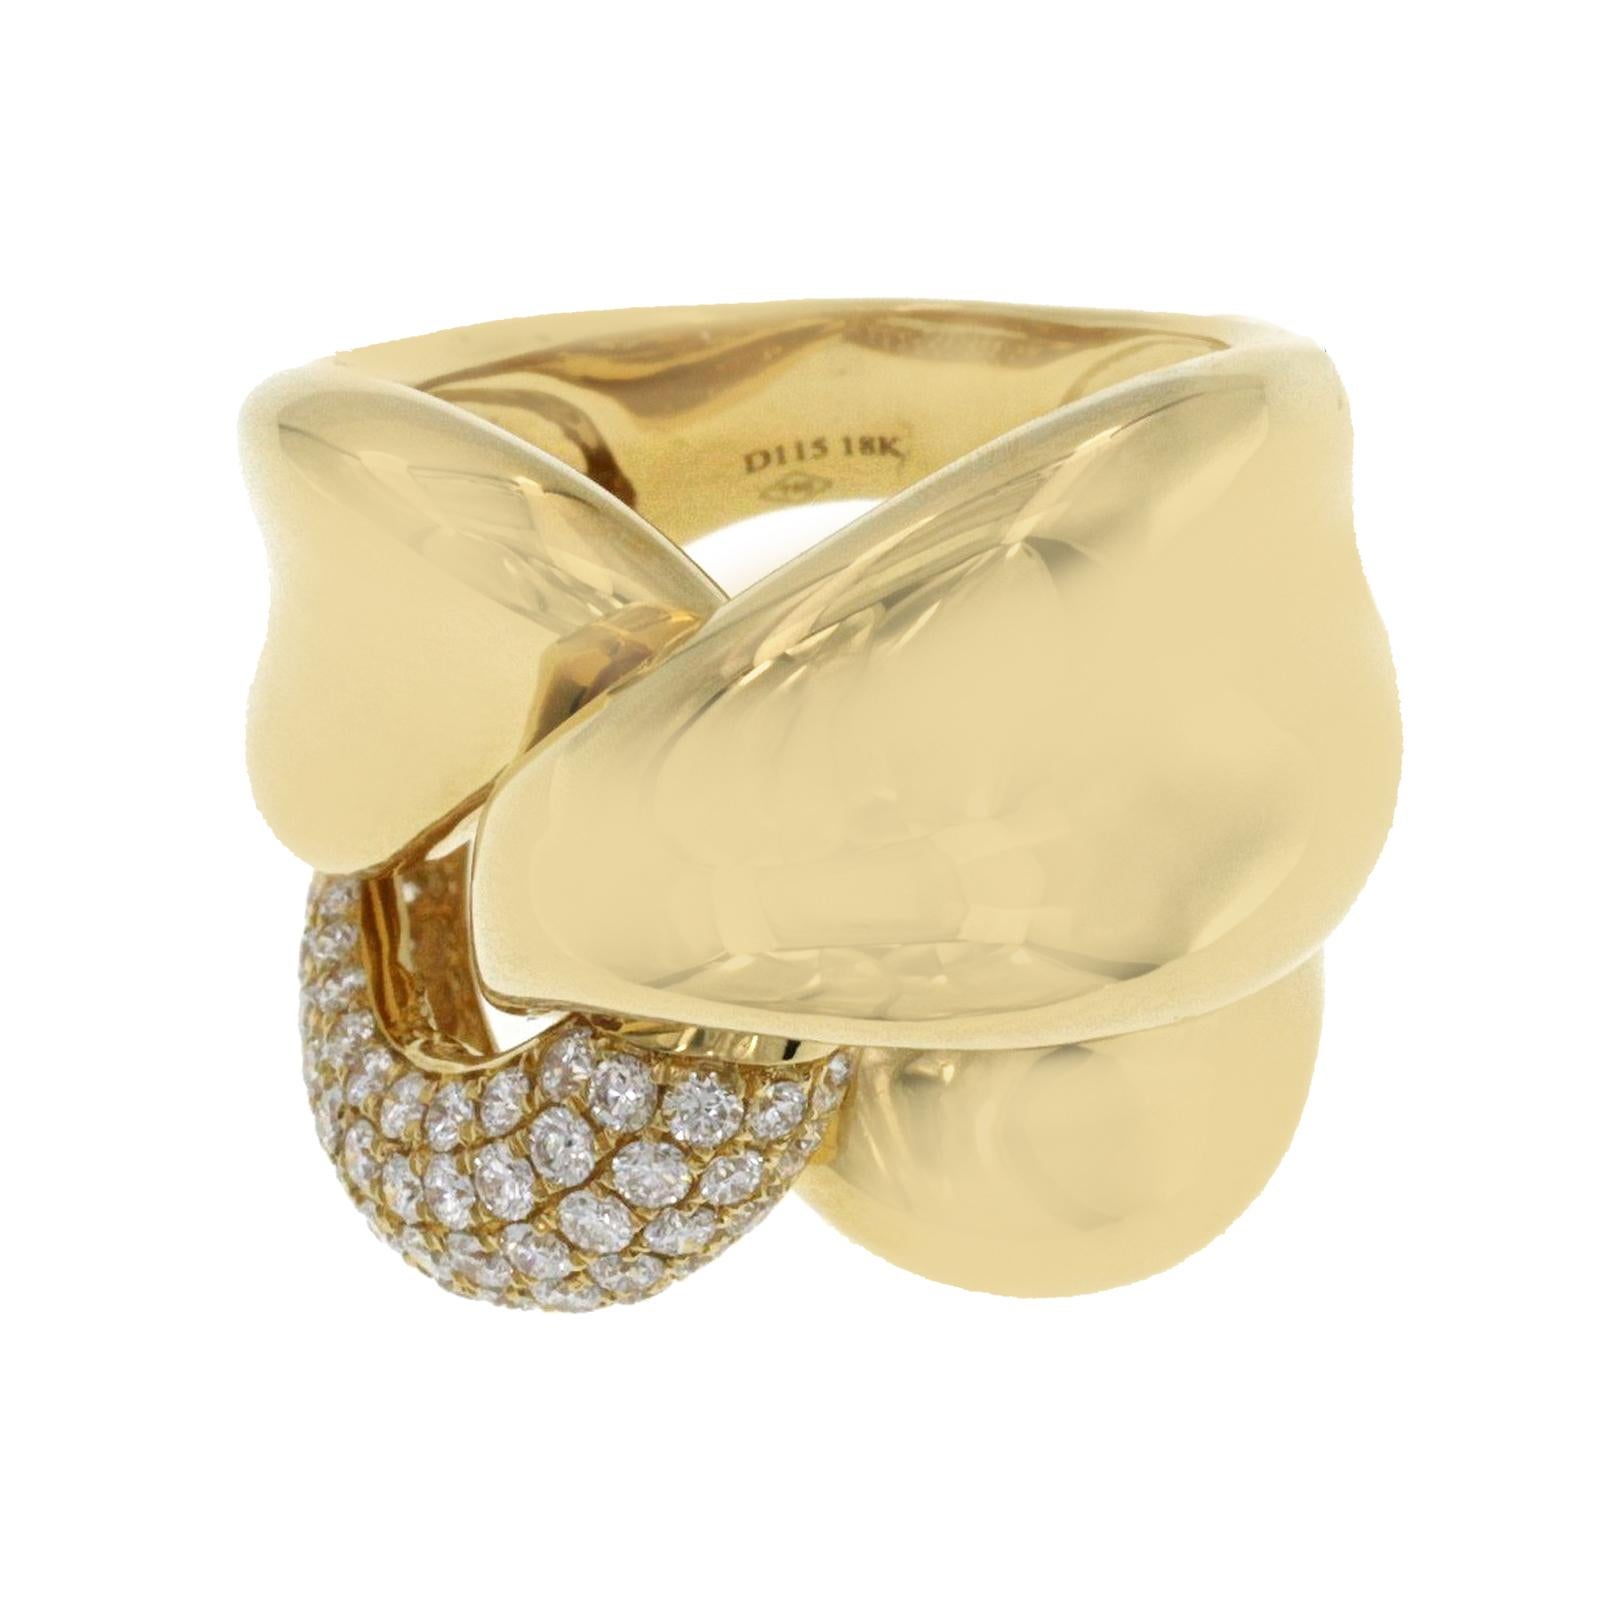 100% Authentic, 100% Customer Satisfaction

Top: 22 mm

Band Width: 5.5 mm

Ring Height: 12 mm

Metal: 18K Yellow Gold 

Size: 6-8 ( Please message Us for your Size )

Hallmarks: 18K

Total Weight: 17.2 Grams

Stone Type: 1.55 CT G VS